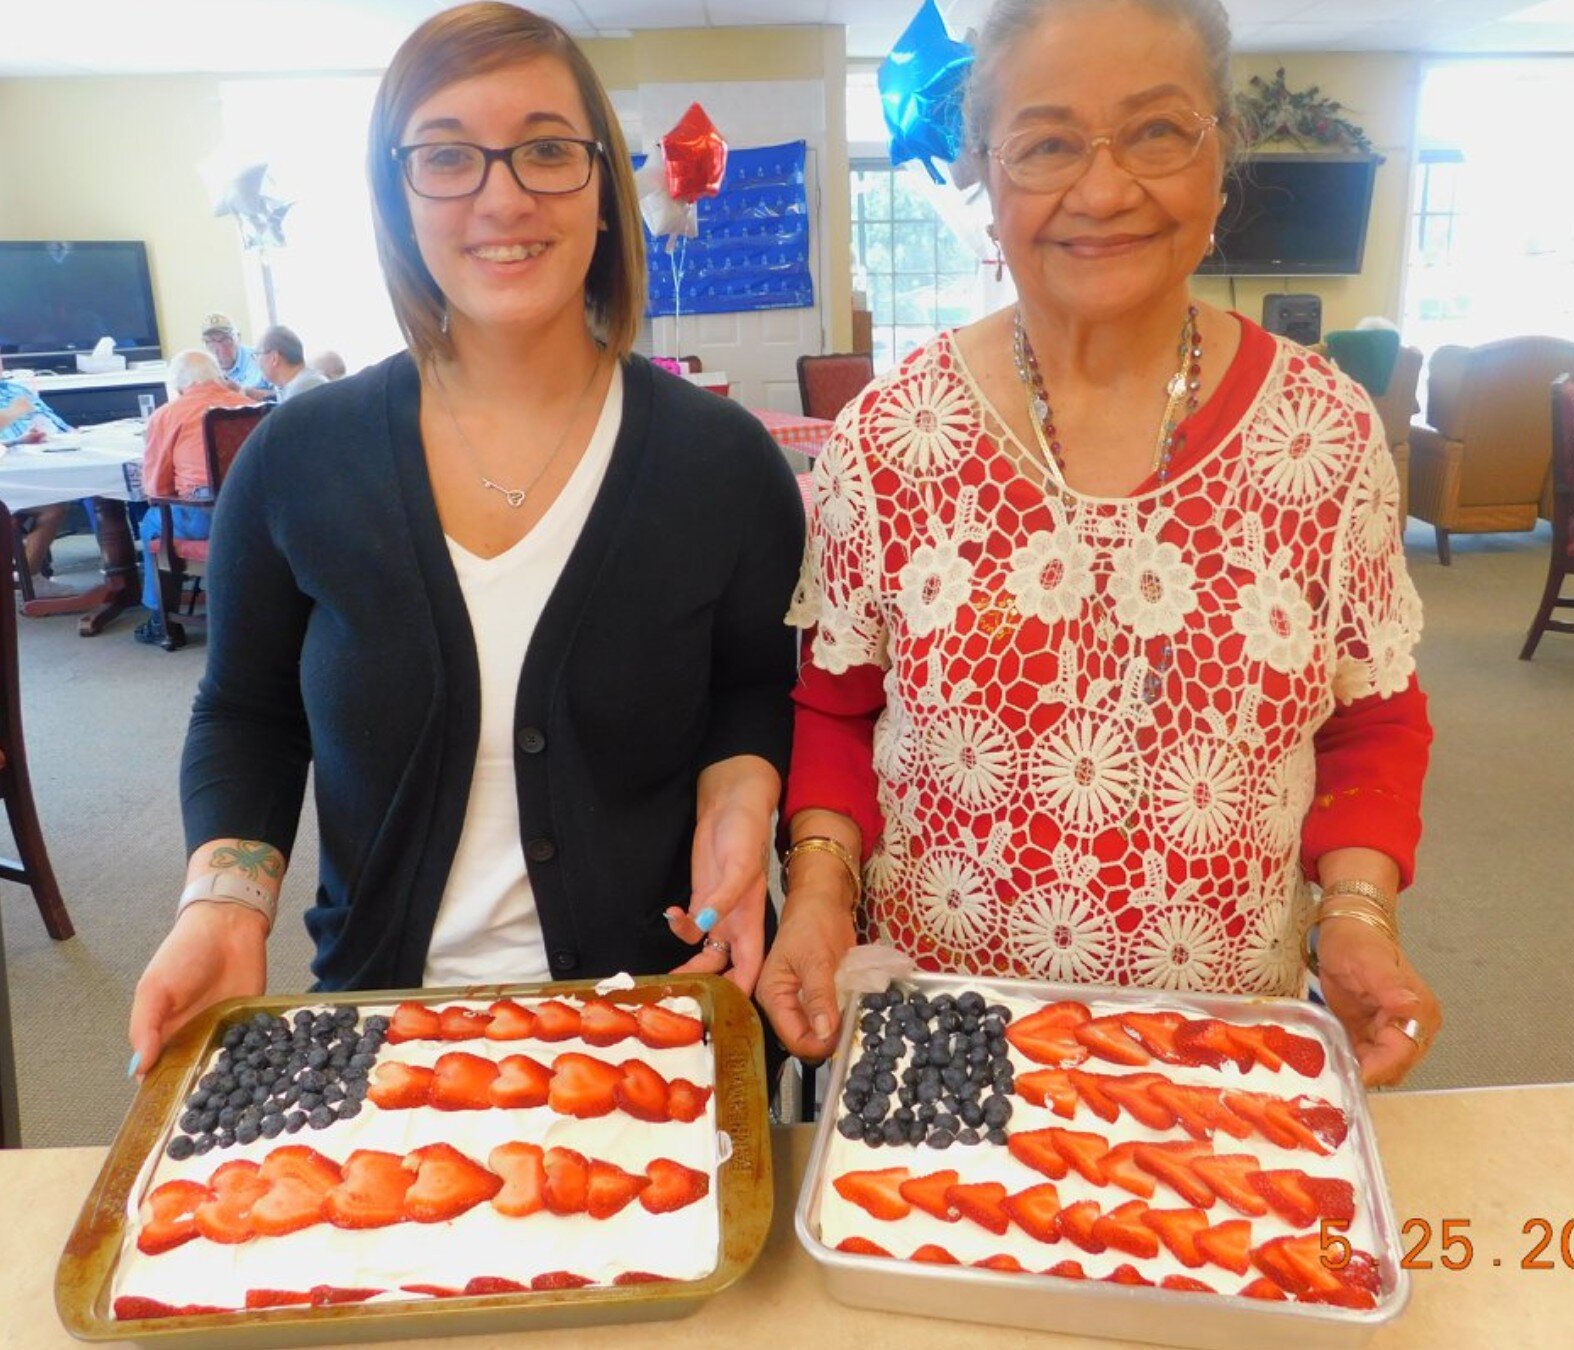 Throwback Thursday to our Memorial Day cakes! July 4th is right around the corner!